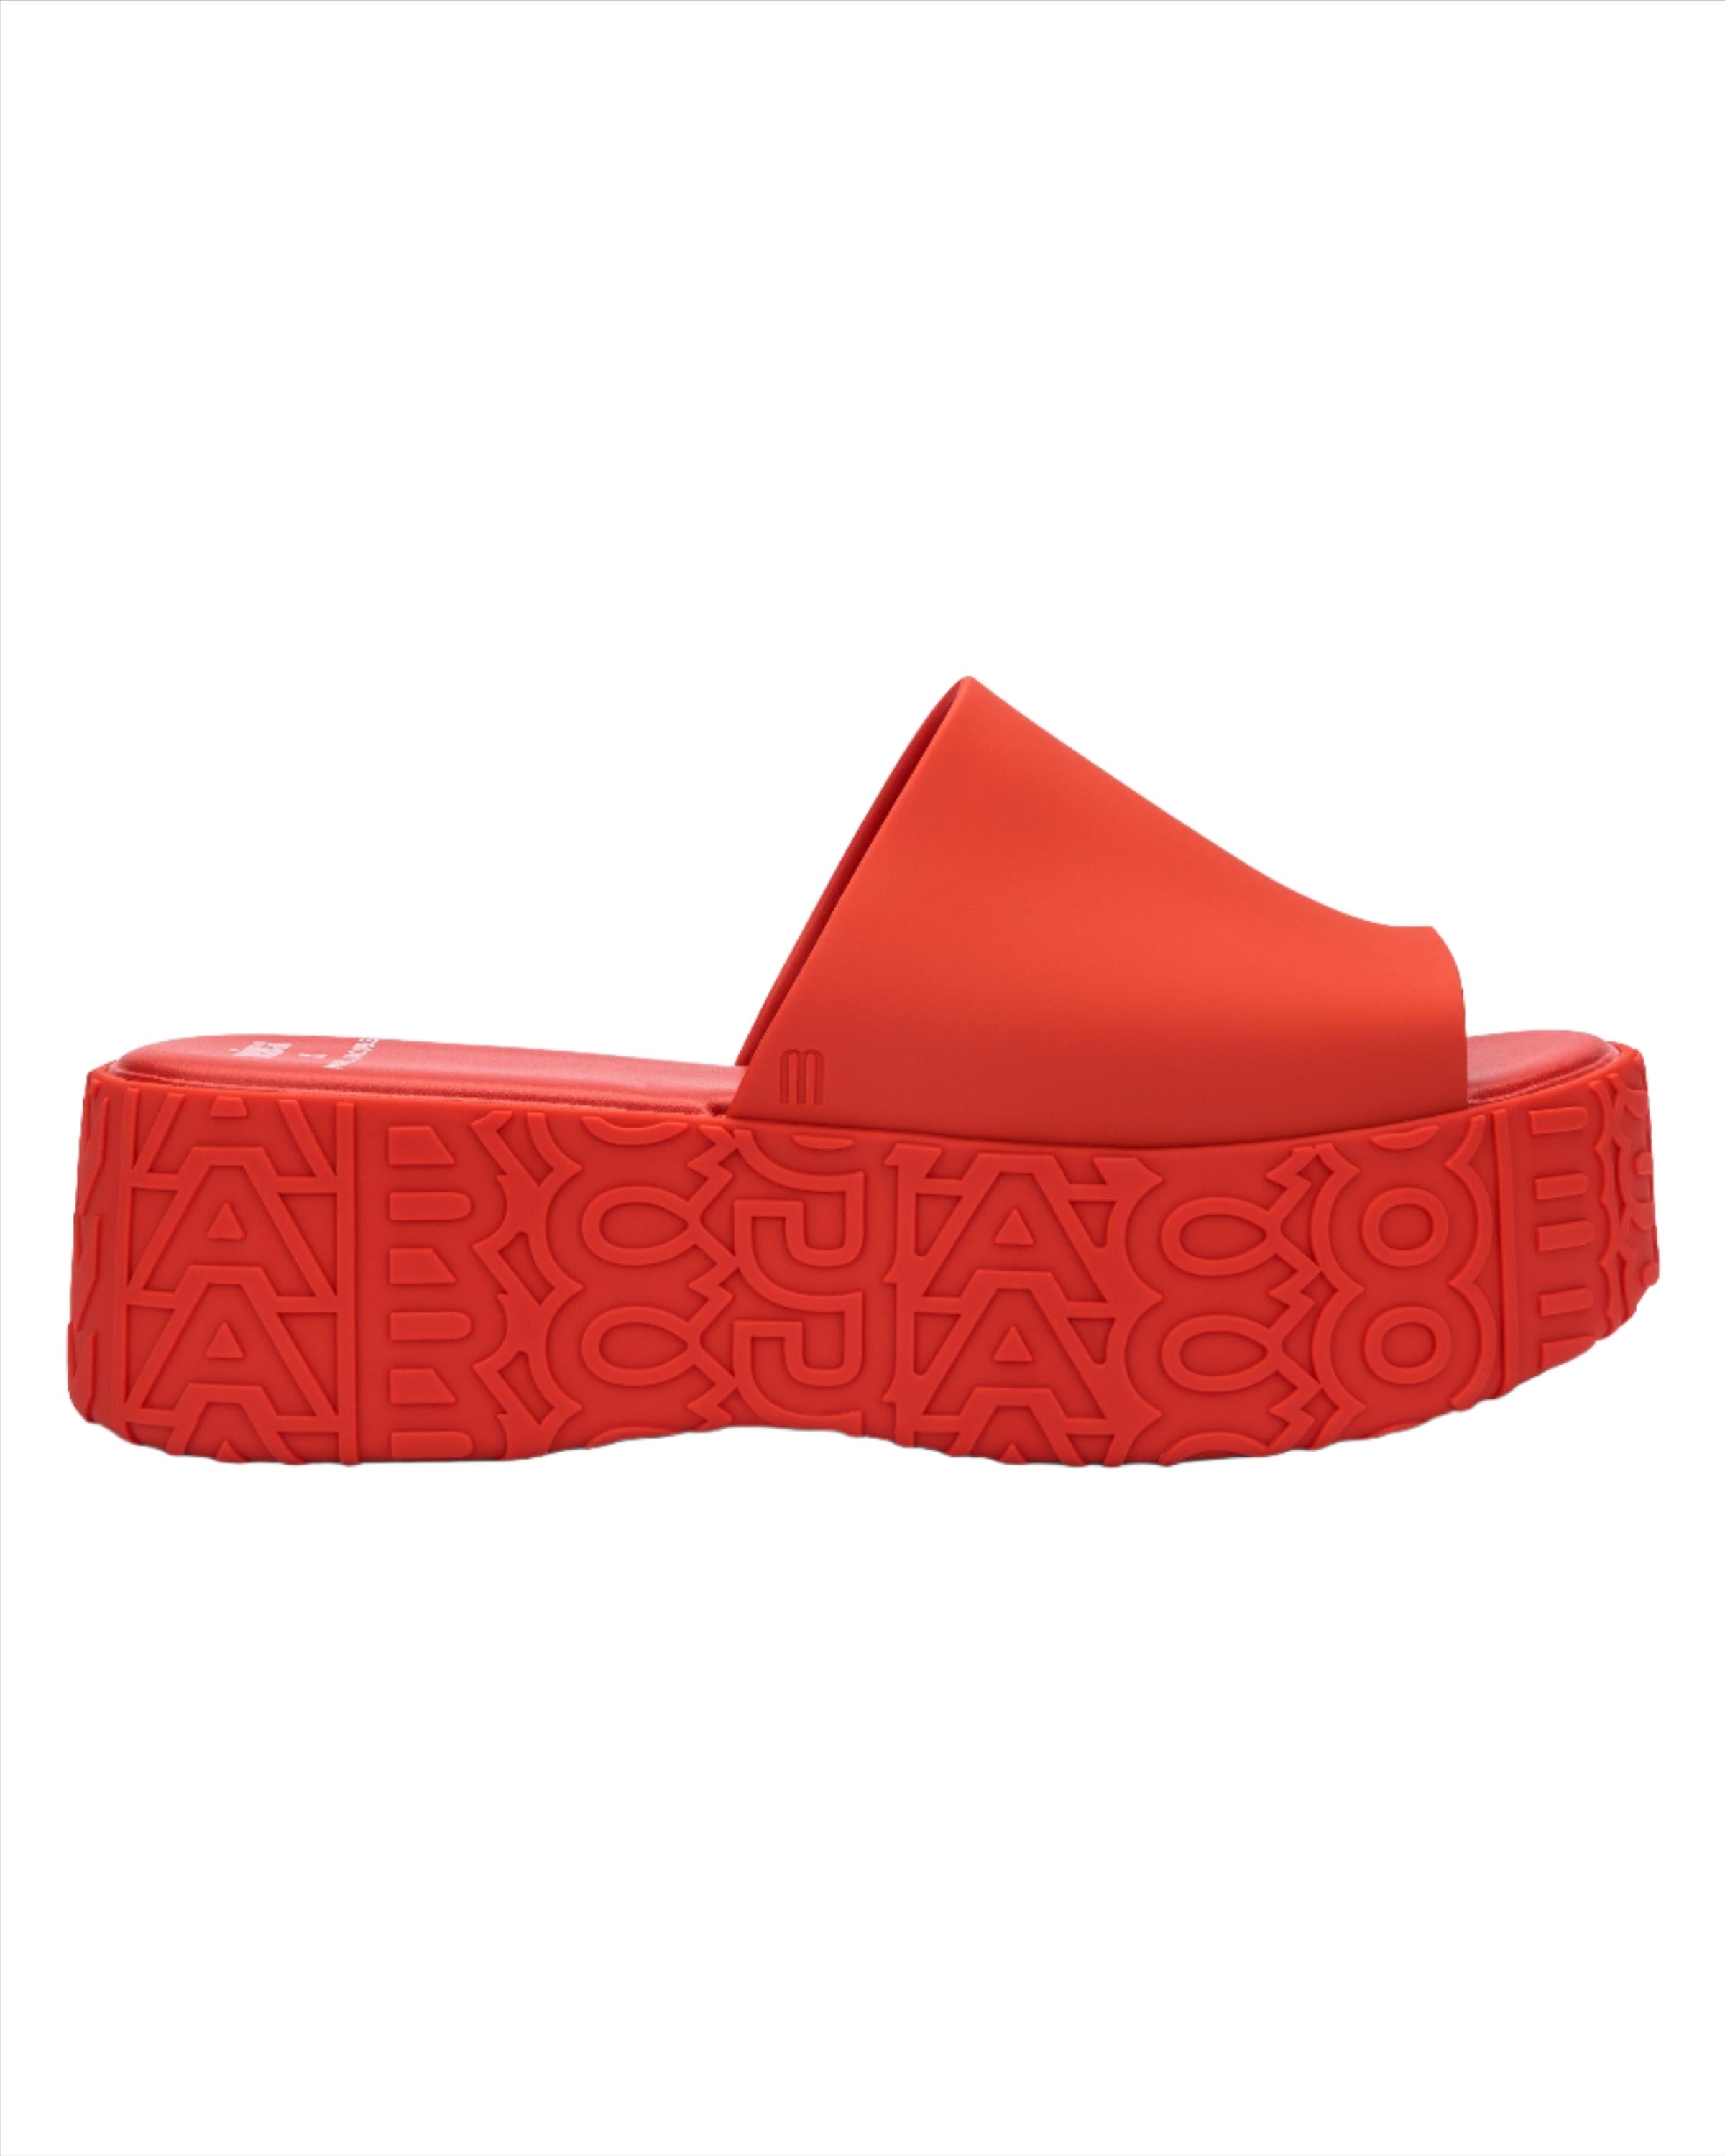 Melissa Becky x Marc Jacobs - Red